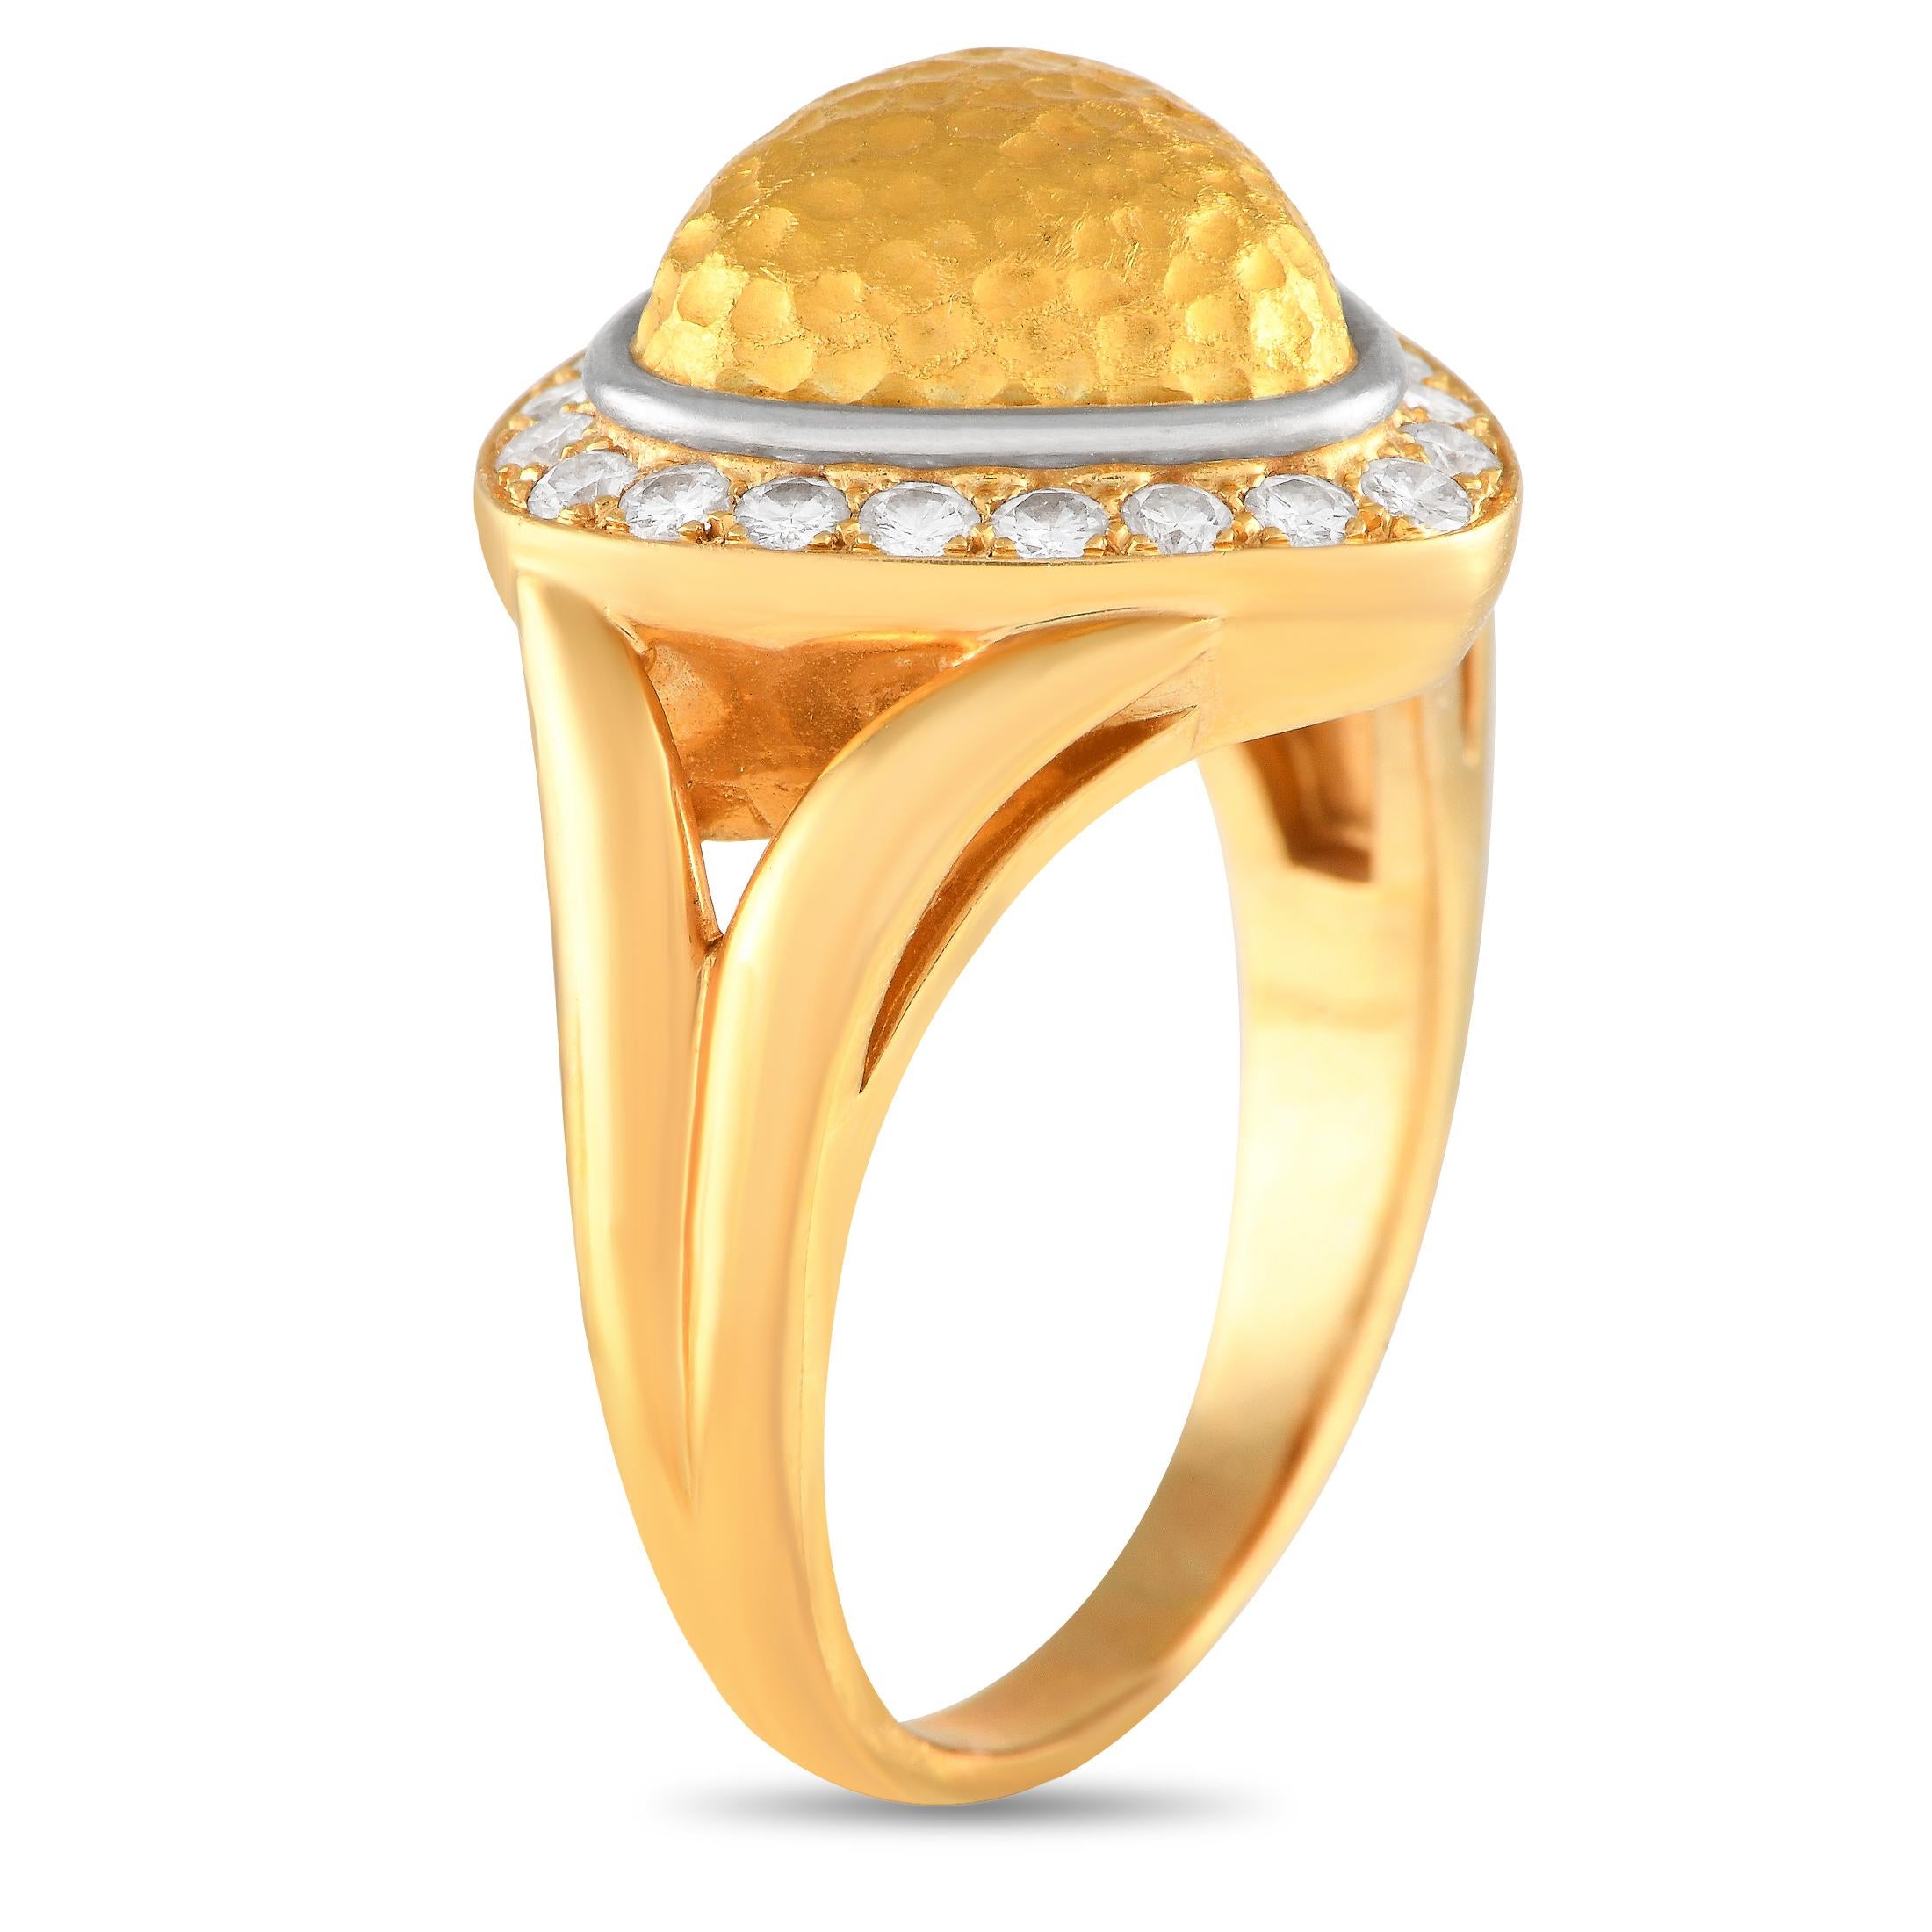 From Maison Chaumet, here is an 18K yellow gold ring with undeniable retro charm. This cocktail ring has a curvy split shank topped with a domed, rounded triangle gold nugget with a hammered finish. The textured centerpiece is surrounded by a halo